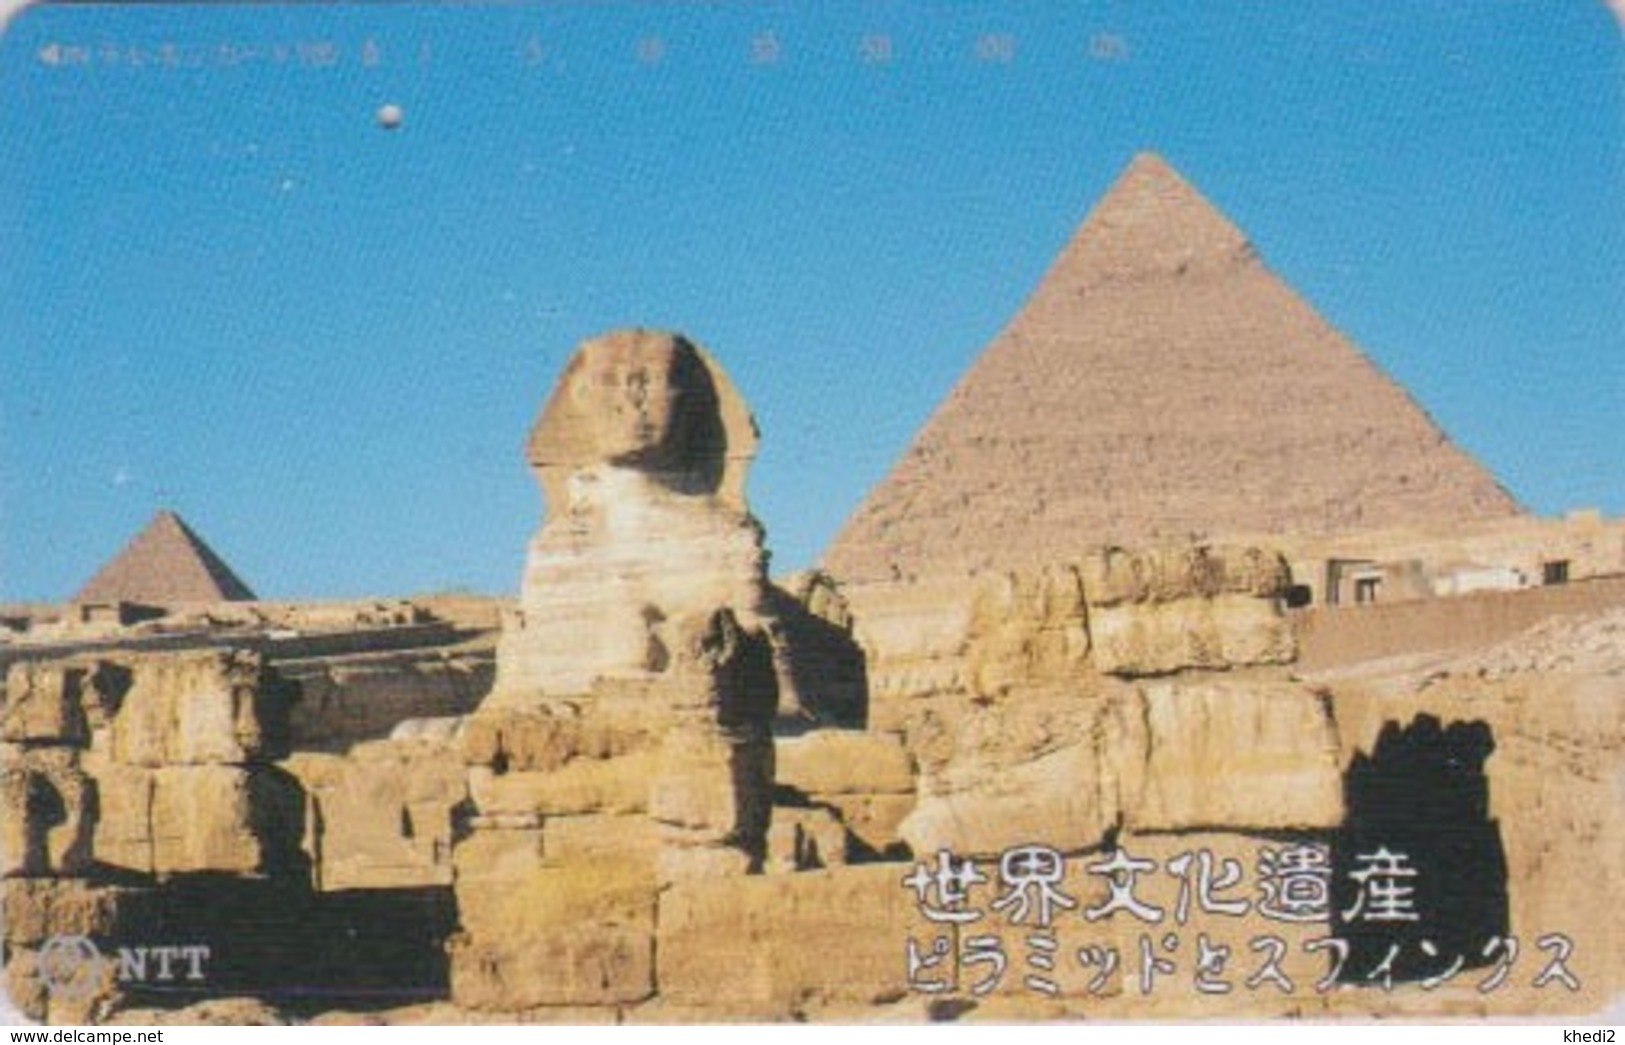 Télécarte JAPON / NTT 331-452 B ** ONE PUNCH ** - Site EGYPTE - PYRAMIDE & SPHINX - EGYPT Related JAPAN Phonecard - 202 - Giappone